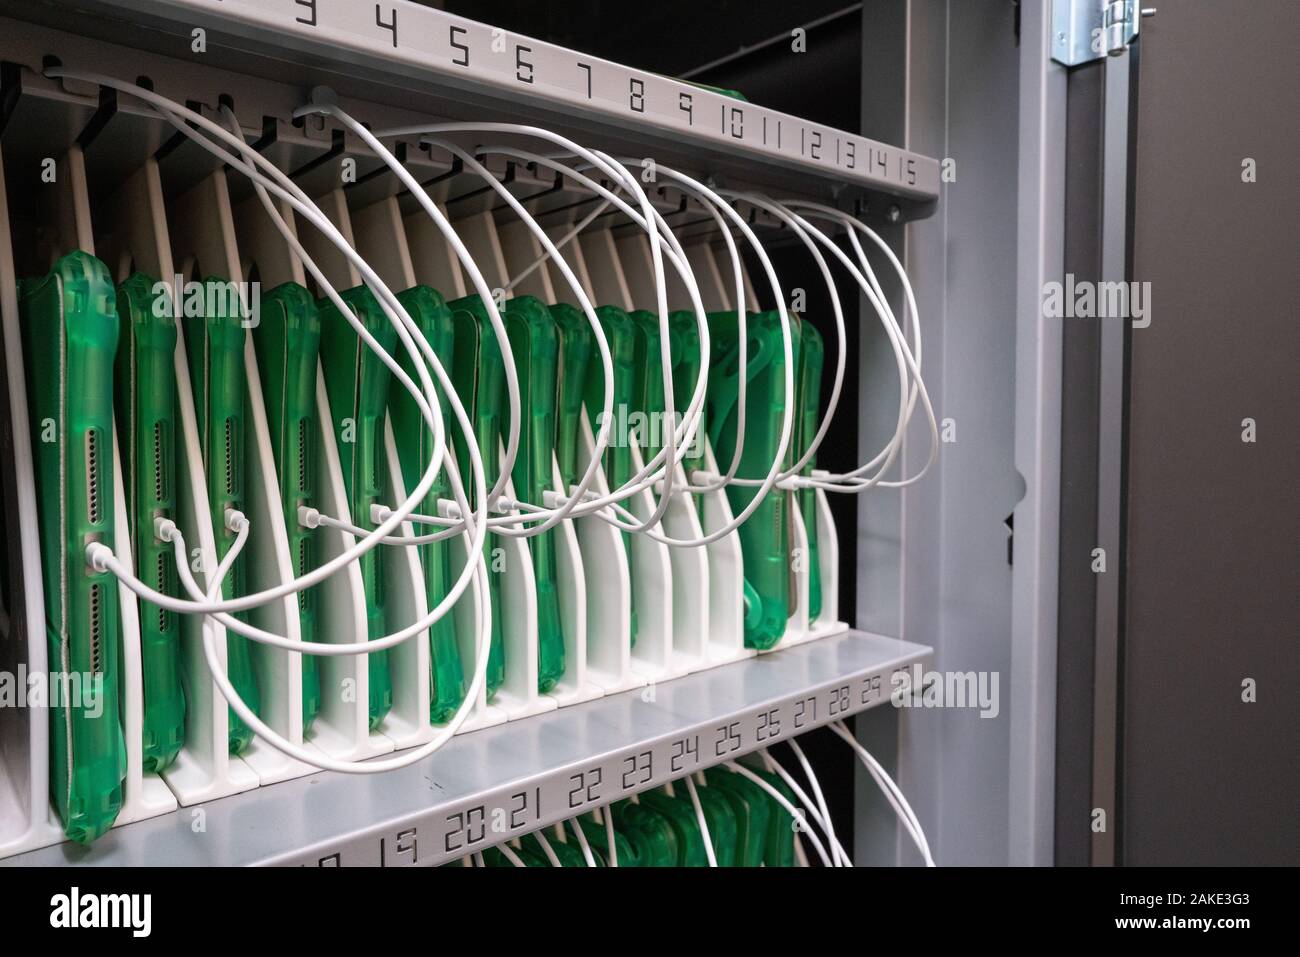 Row of tablets in protective cases being charged in a cabinet in enterprise office location Stock Photo